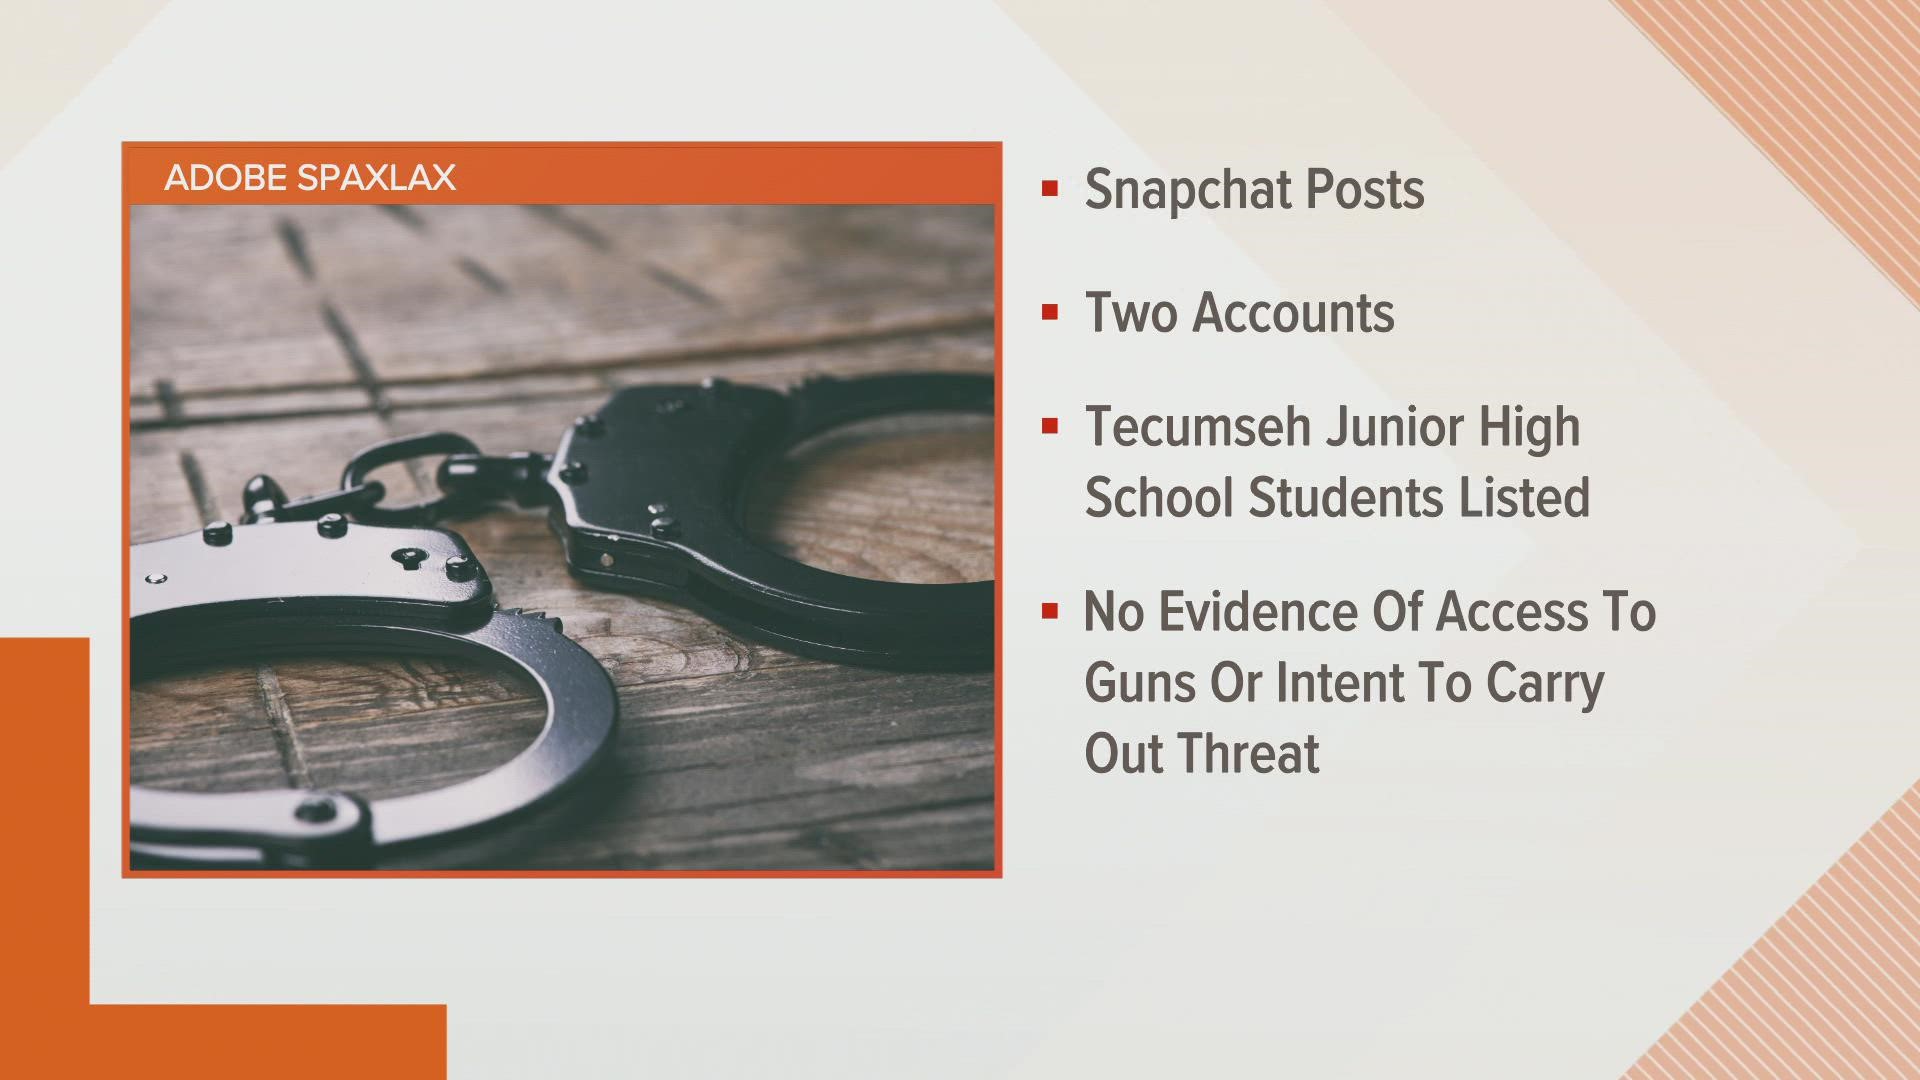 Police found two posts from two Snapchat accounts that listed several students as targets.